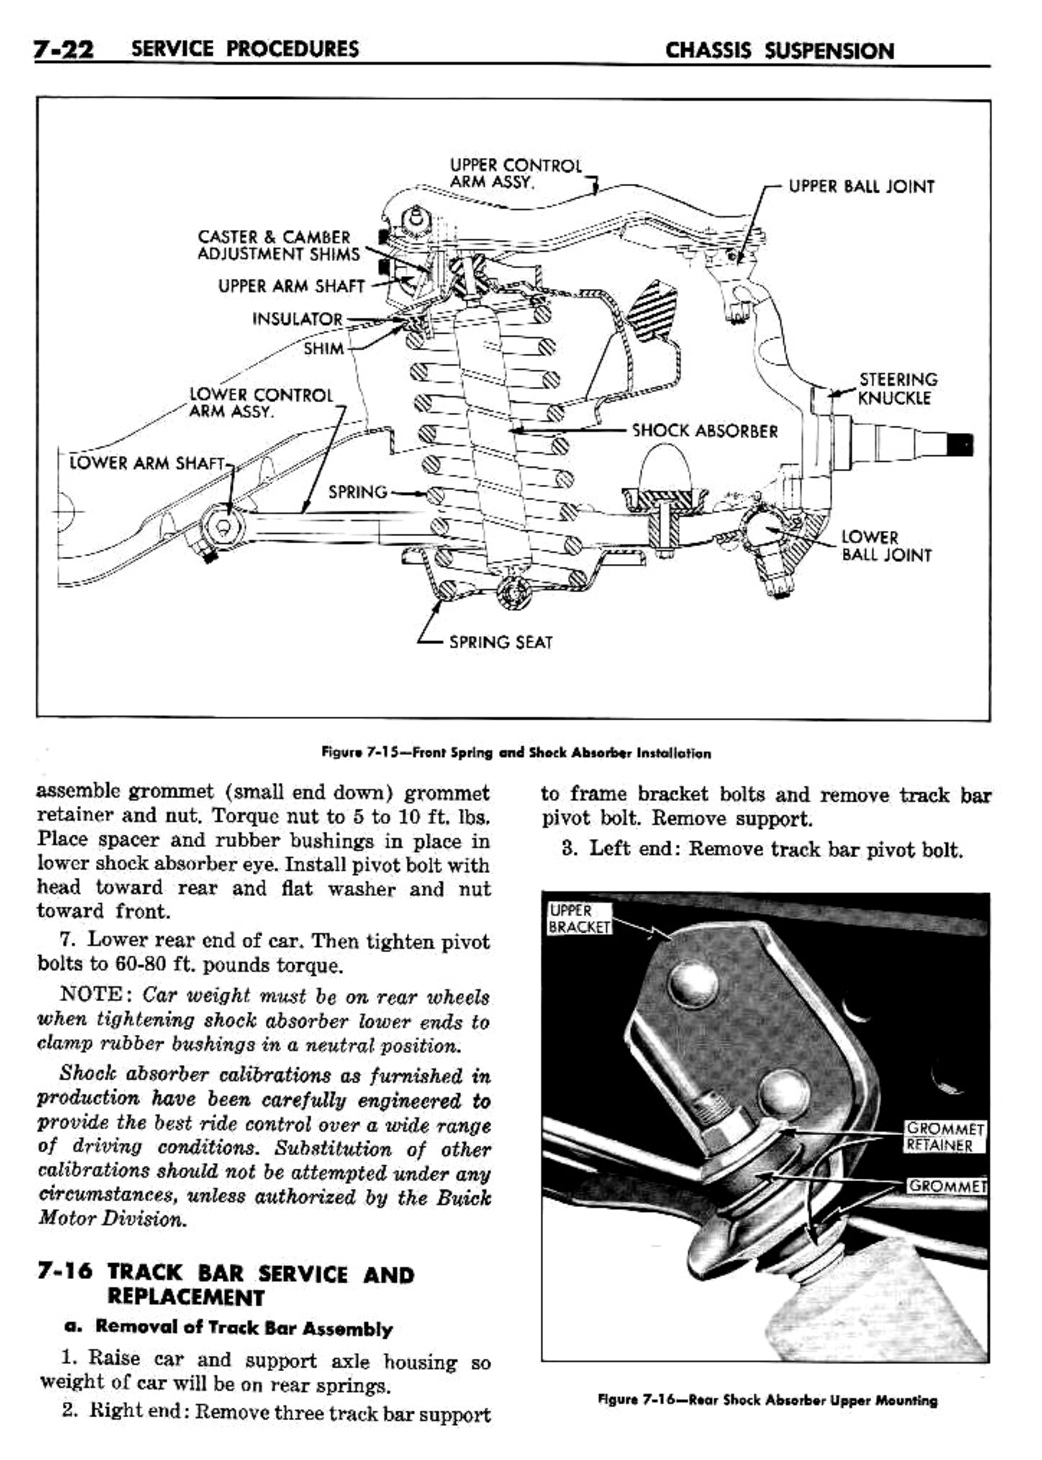 n_08 1960 Buick Shop Manual - Chassis Suspension-022-022.jpg